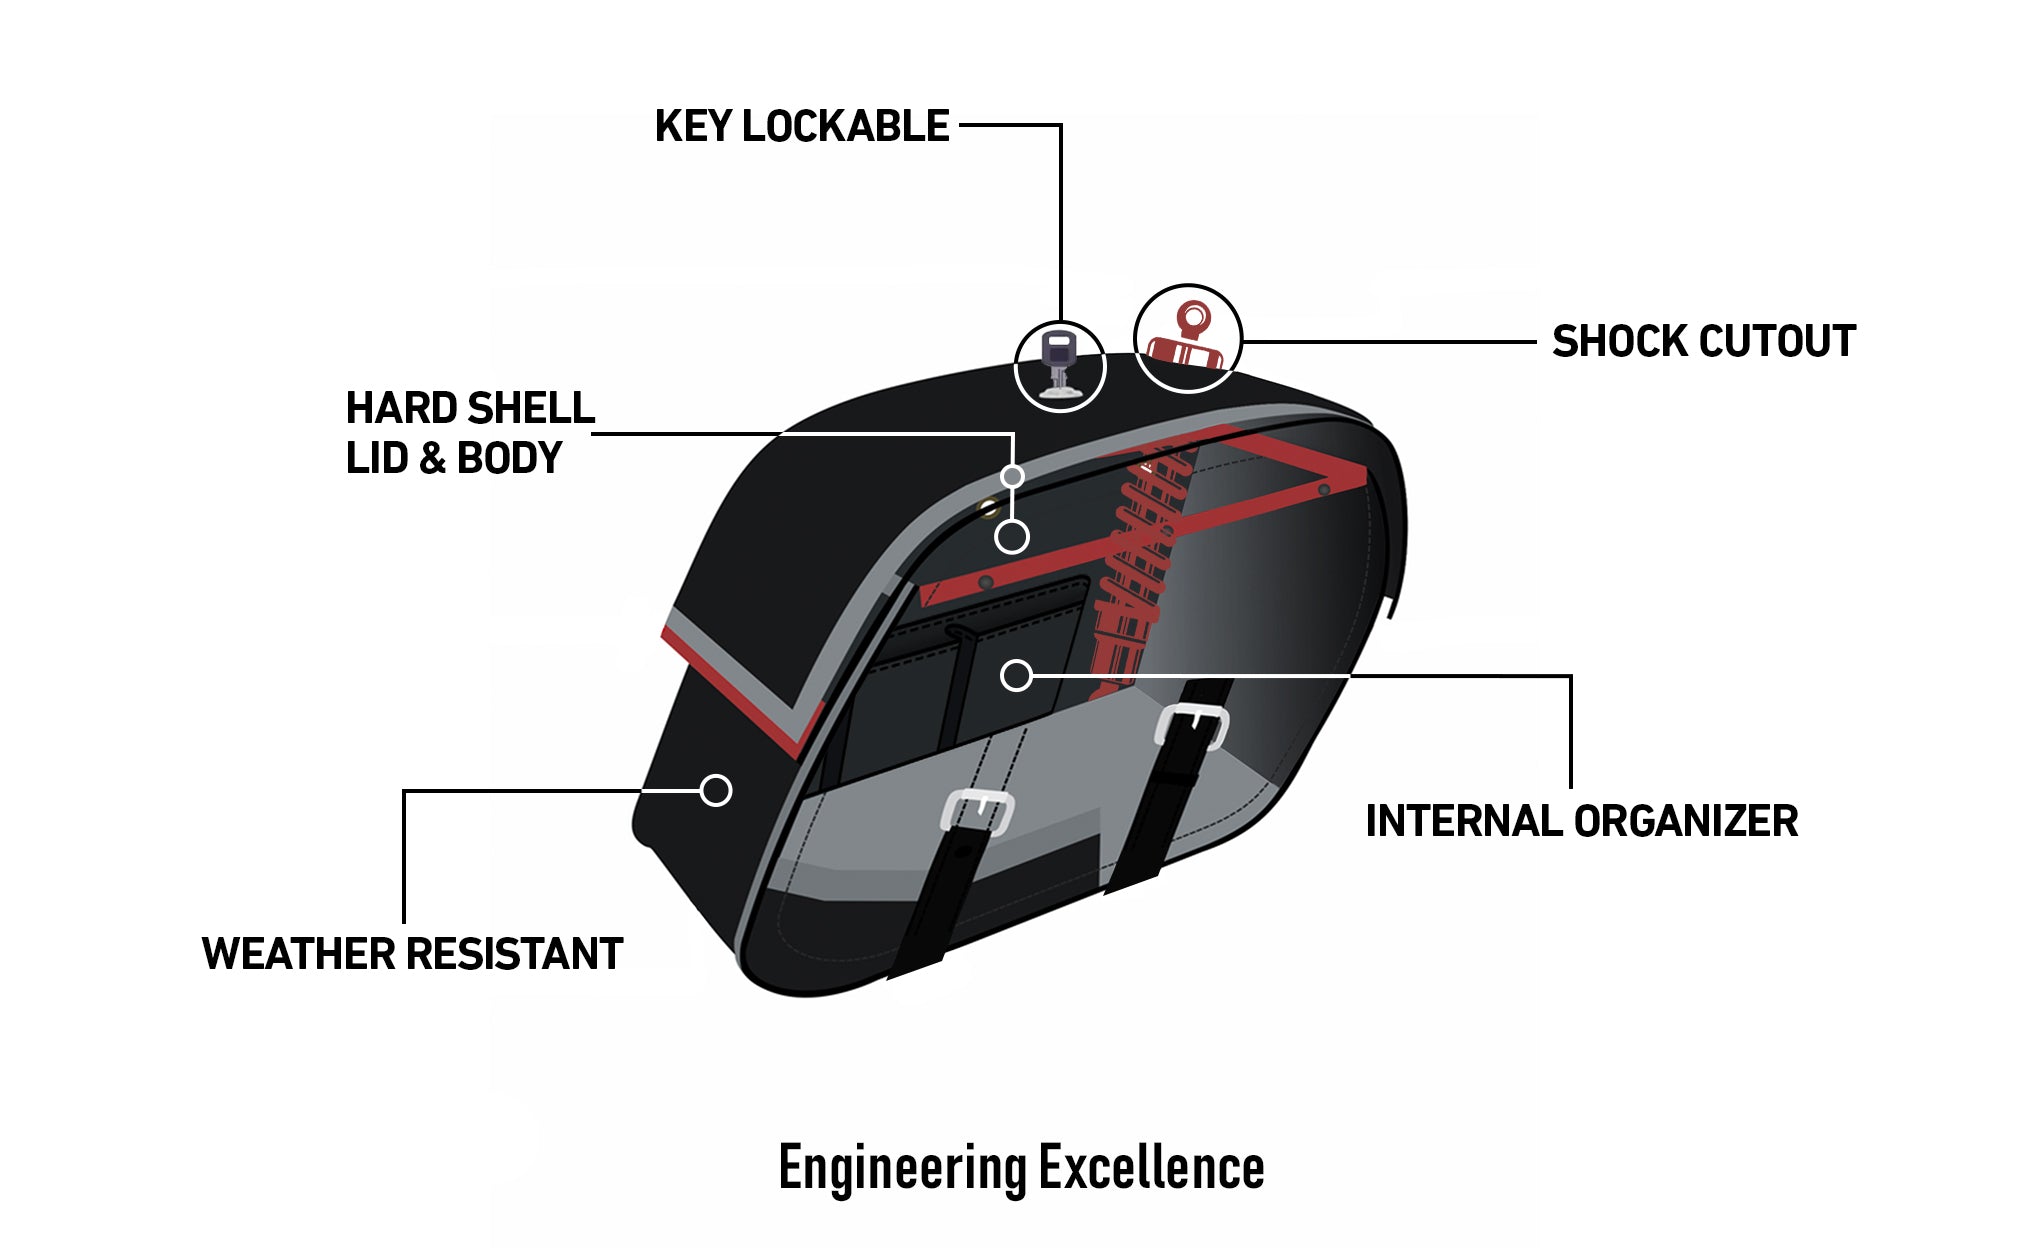 Viking Raven Extra Large Shock Cut Out Leather Motorcycle Saddlebags For Harley Dyna Low Rider Fxdl I Engineering Excellence with Bag on Bike @expand